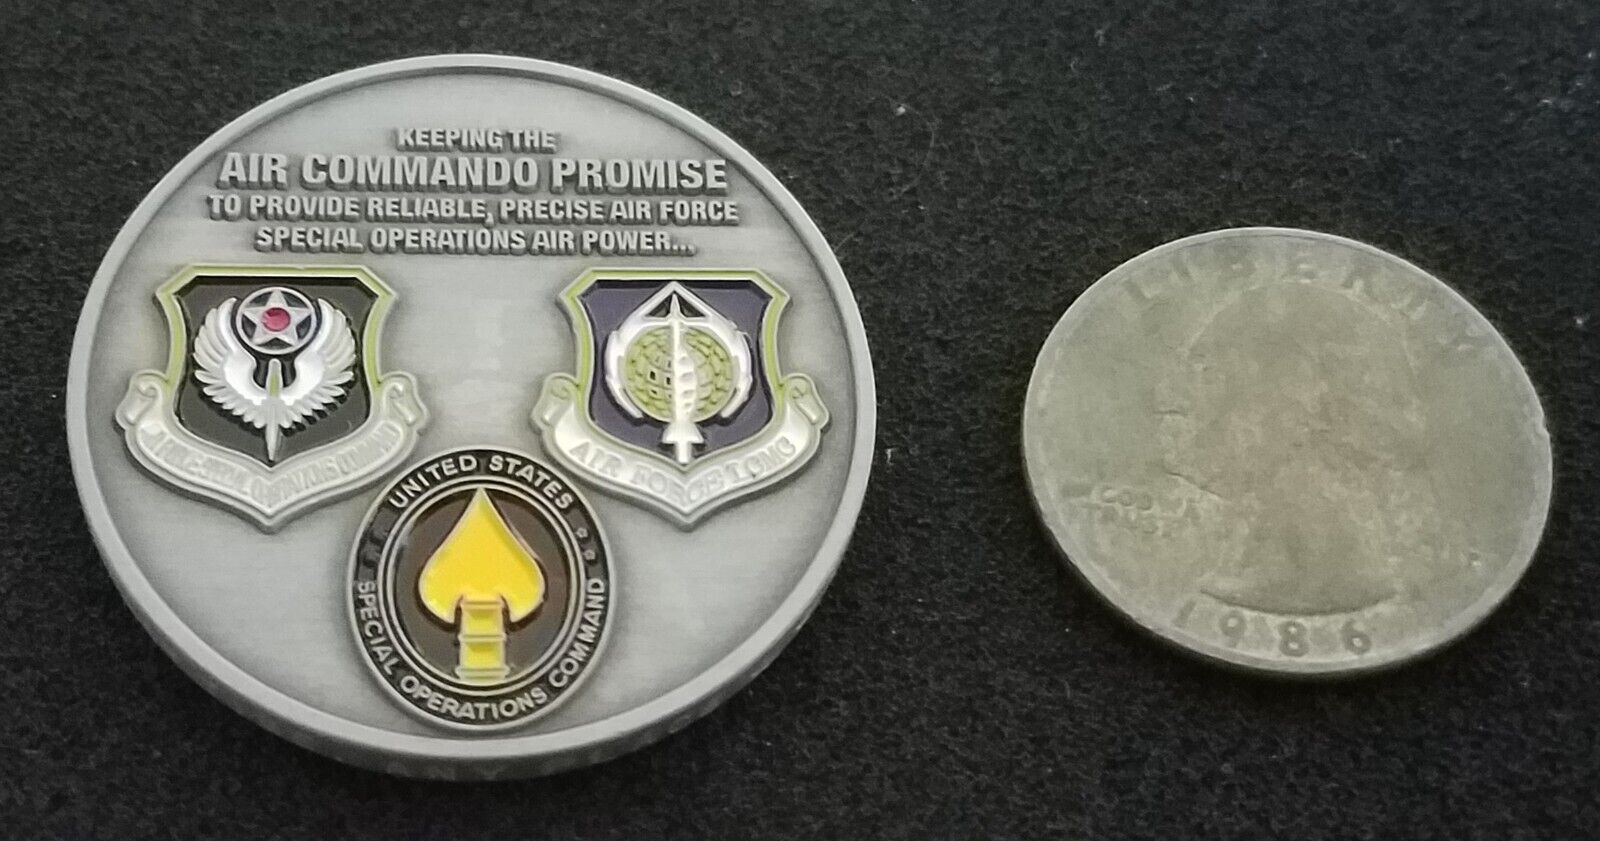 RARE SOCOM Air Commando USAF Special Forces AFSOC Operations Challenge Coin